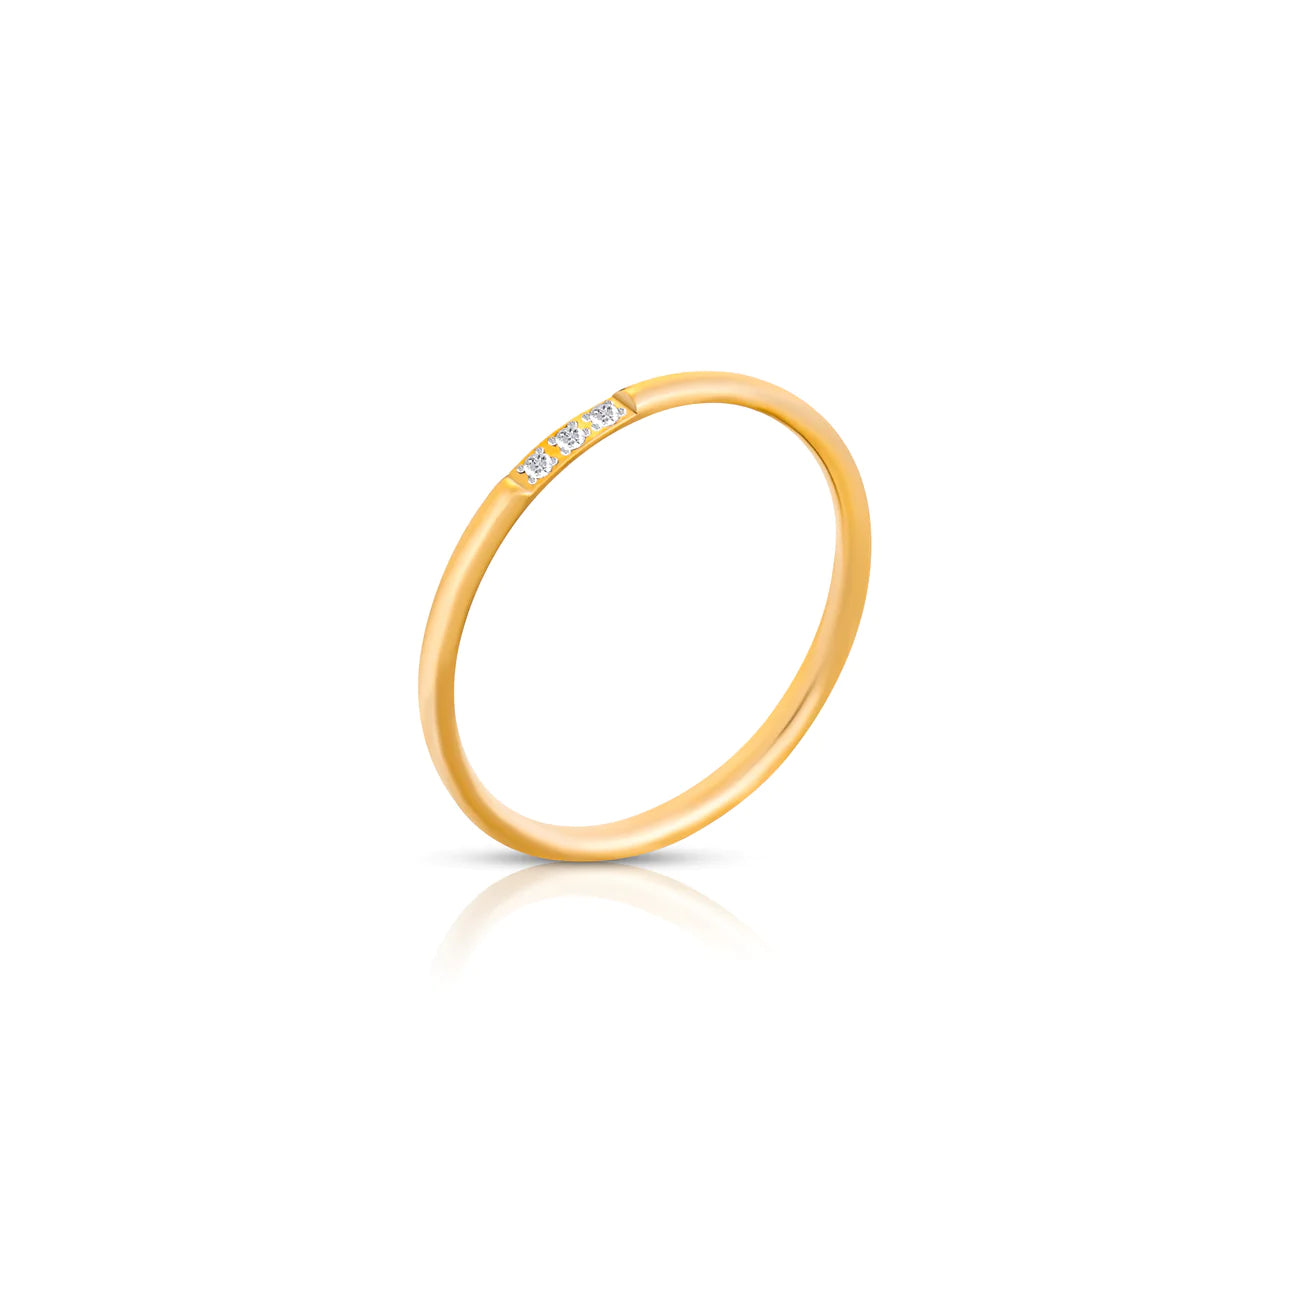 Ellie Vail - Thea Dainty Ring